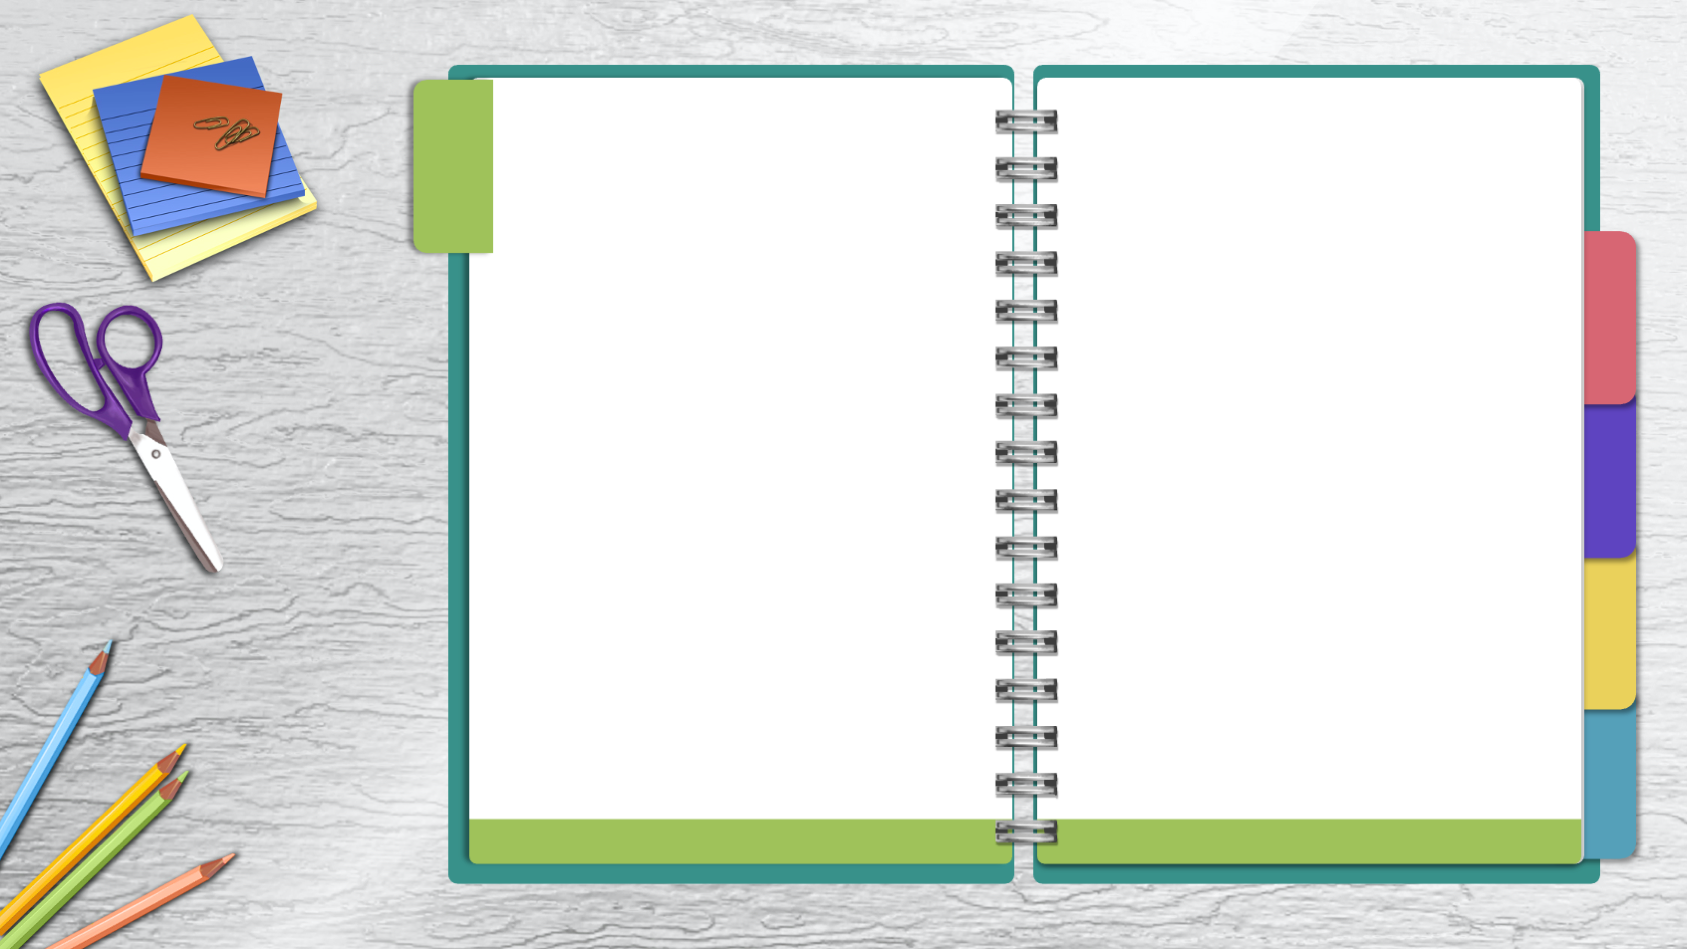 Digital Notebook Templates for Use With Google Slides™: Personal and